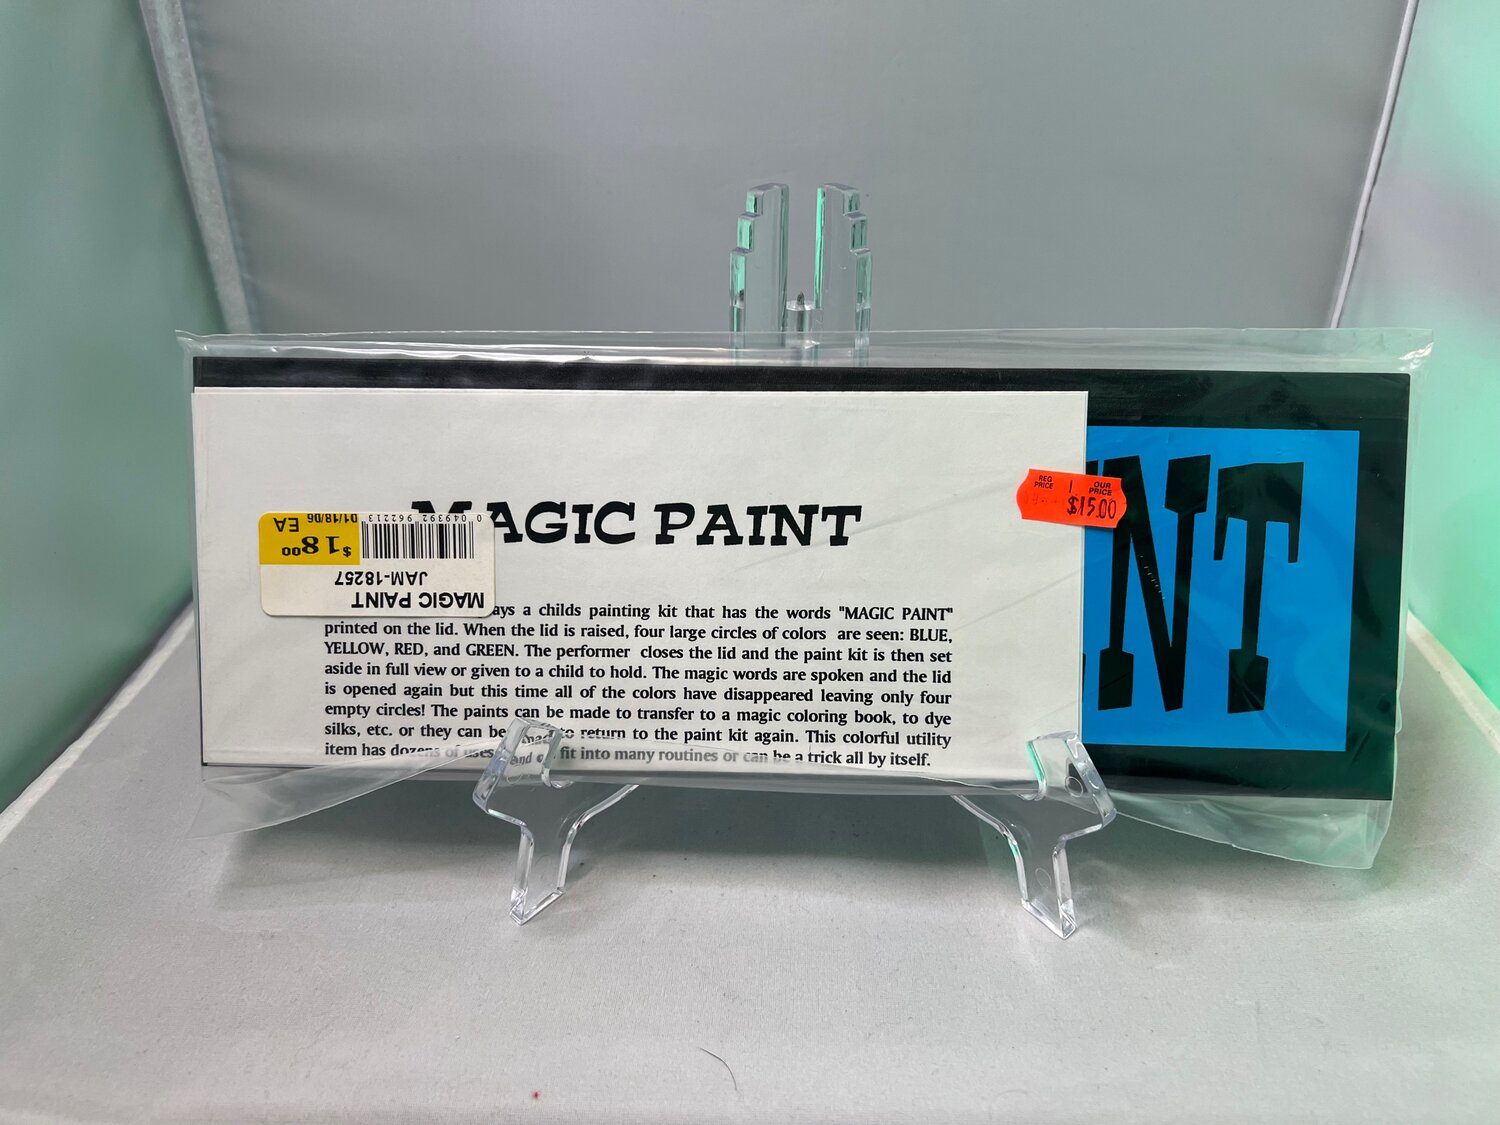 Magic Paint — The Official Travisty